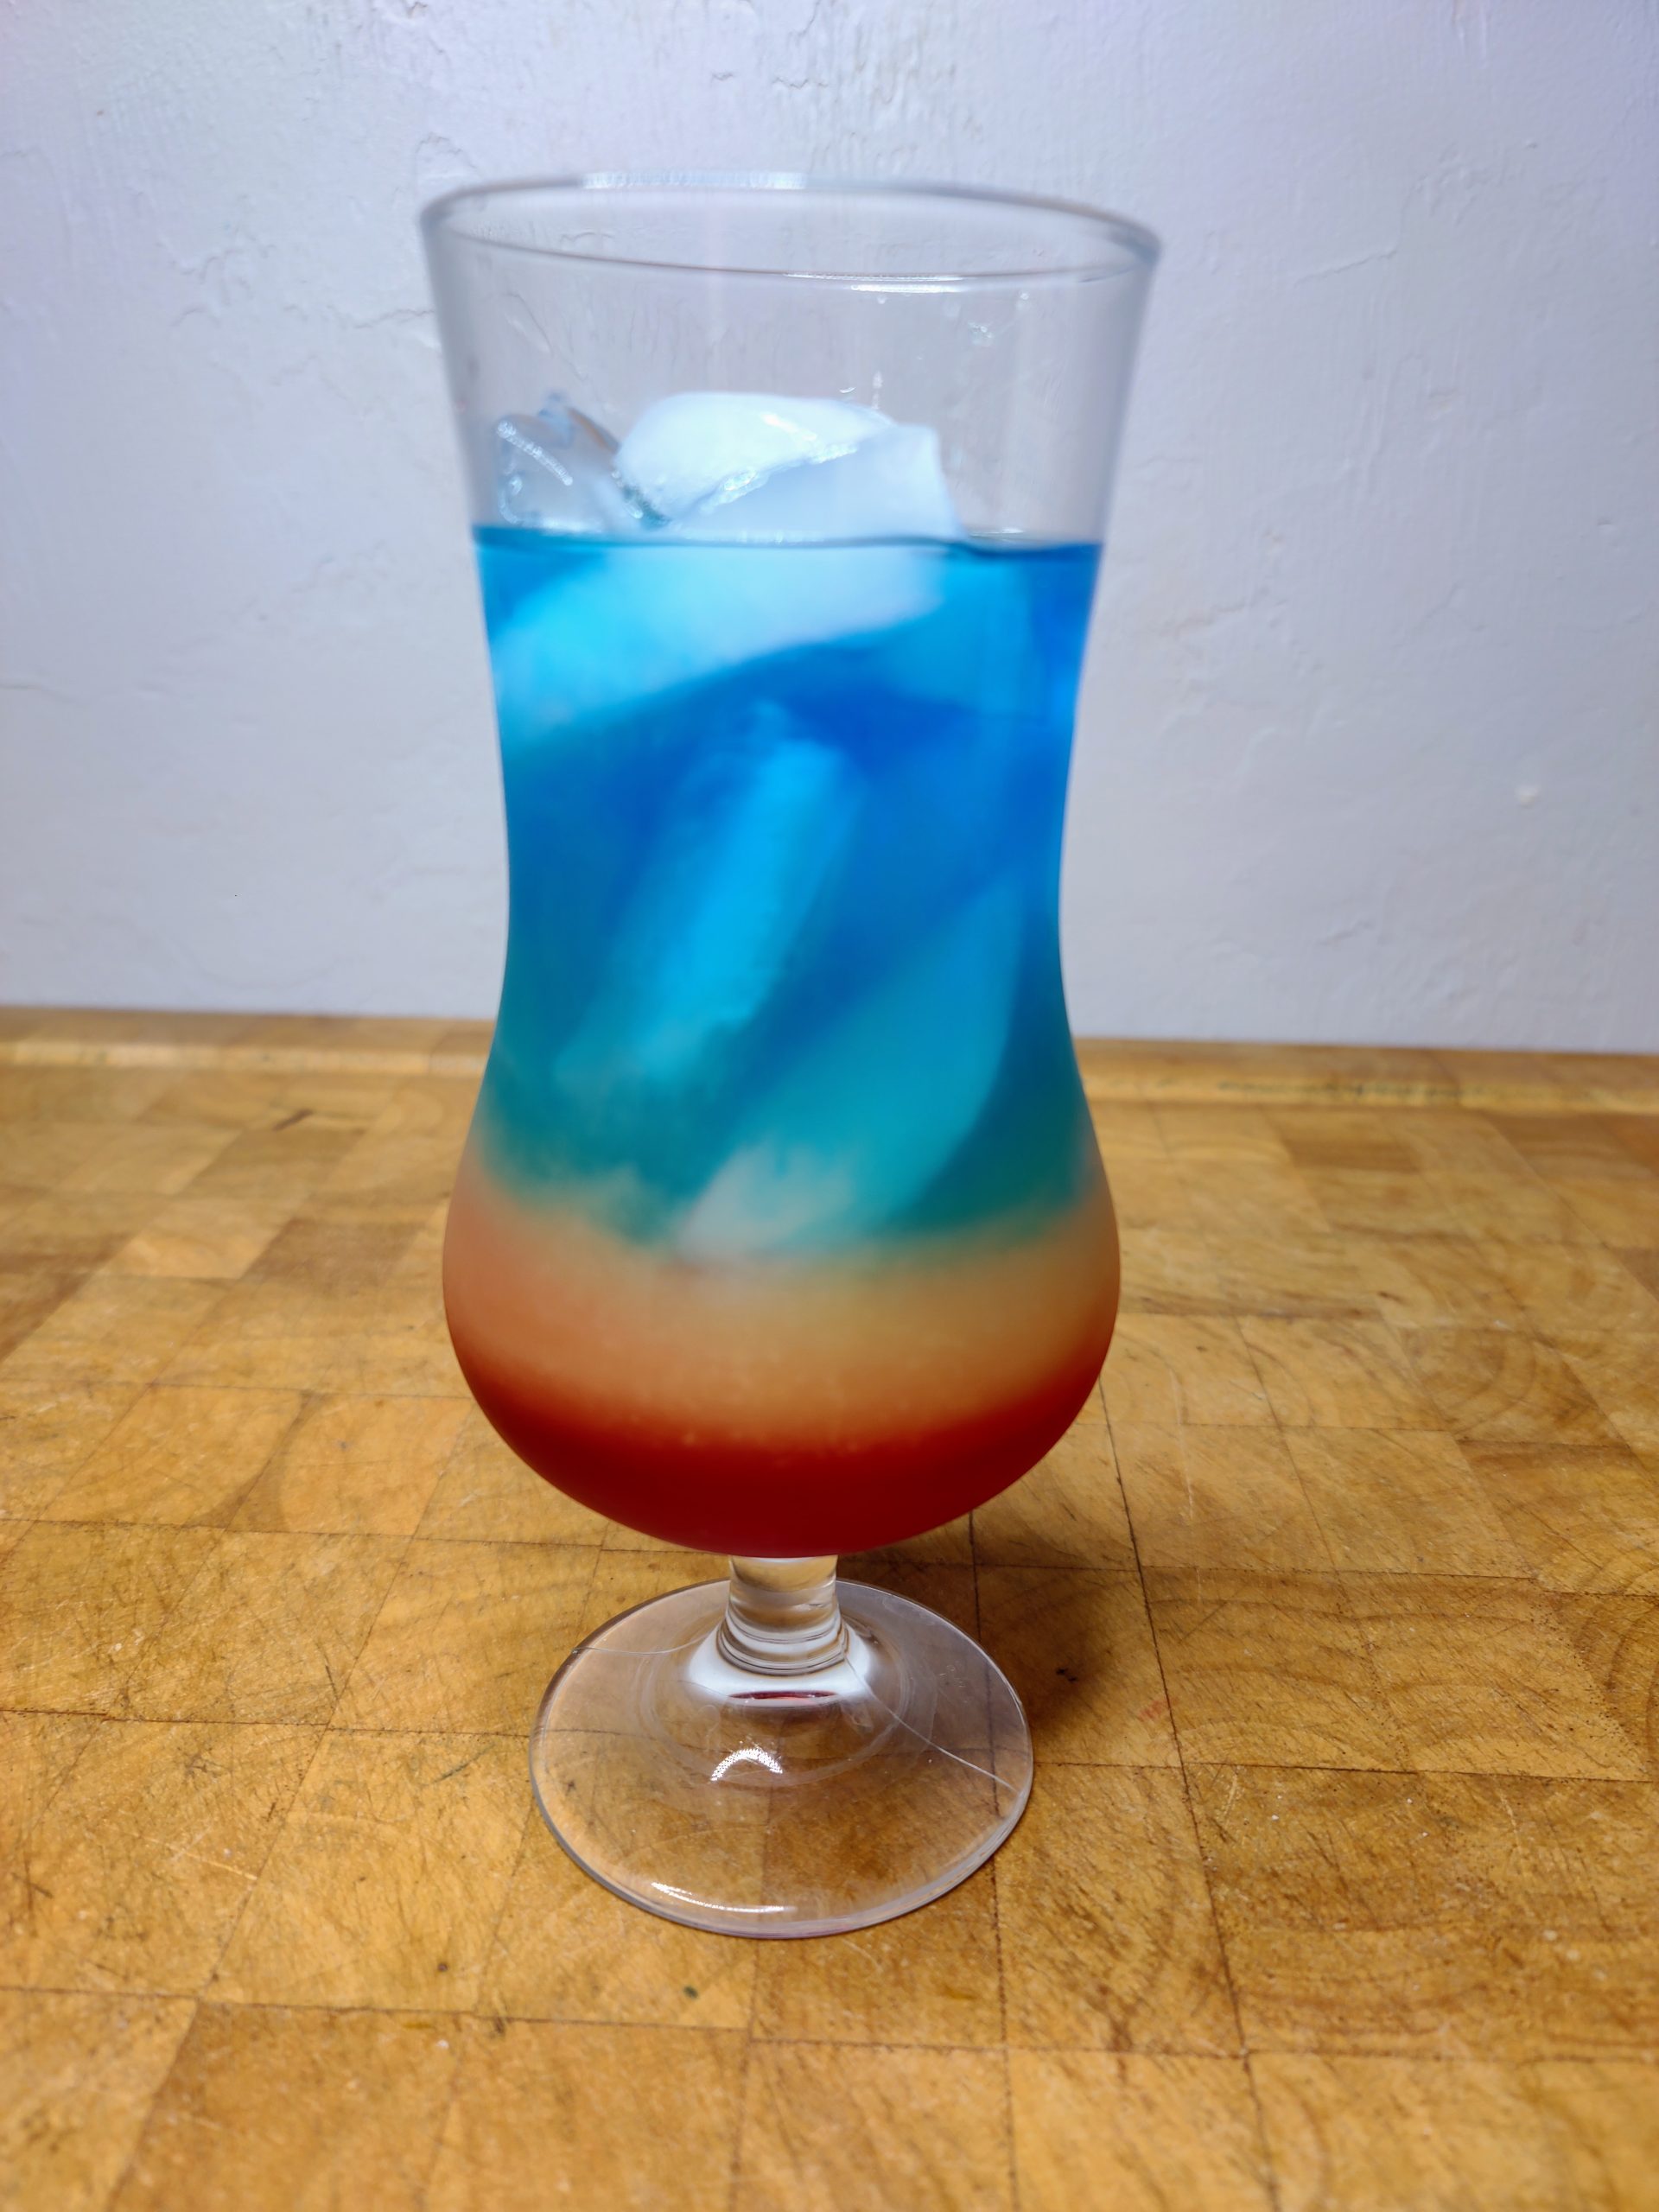 Rainbow cocktail in a hurricane glass on a wooden table.